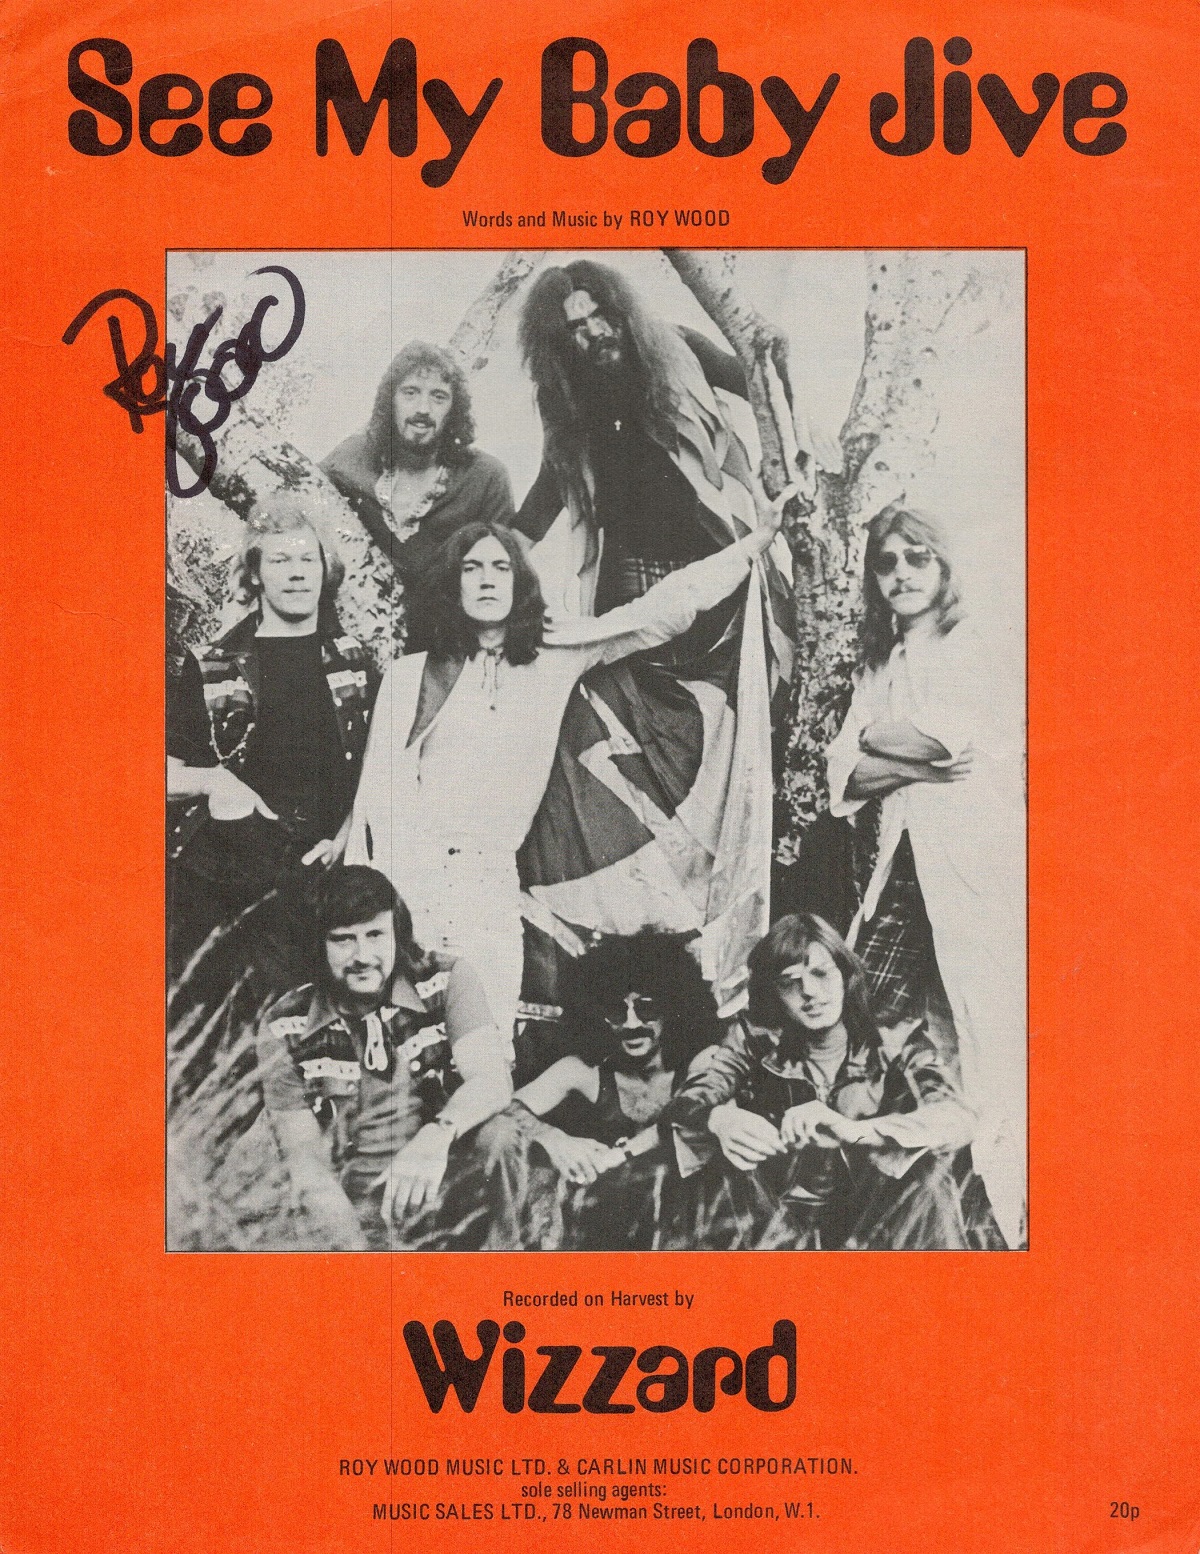 Roy Wood Singer Signed Wizzard See My Baby Jive Sheet Music. Good condition. All autographs come